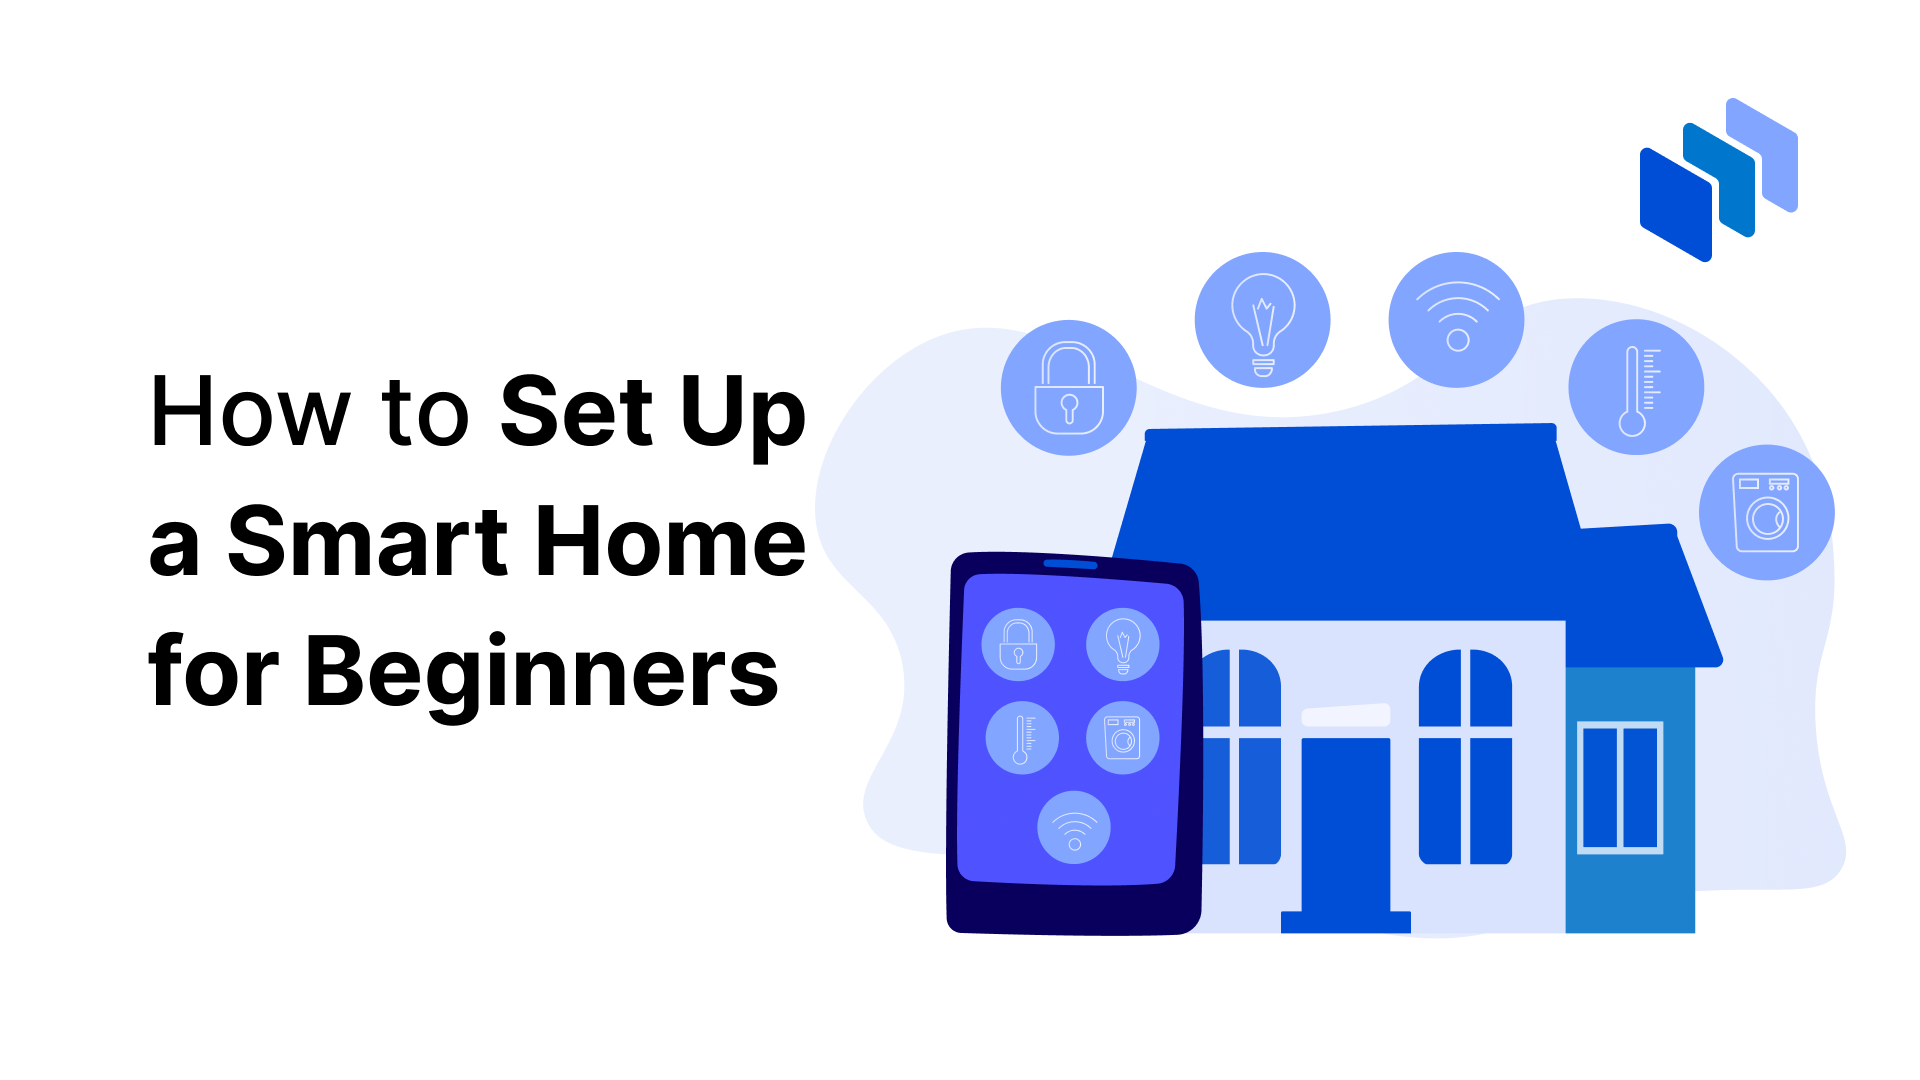 How to Set up a Smart Home for Beginners